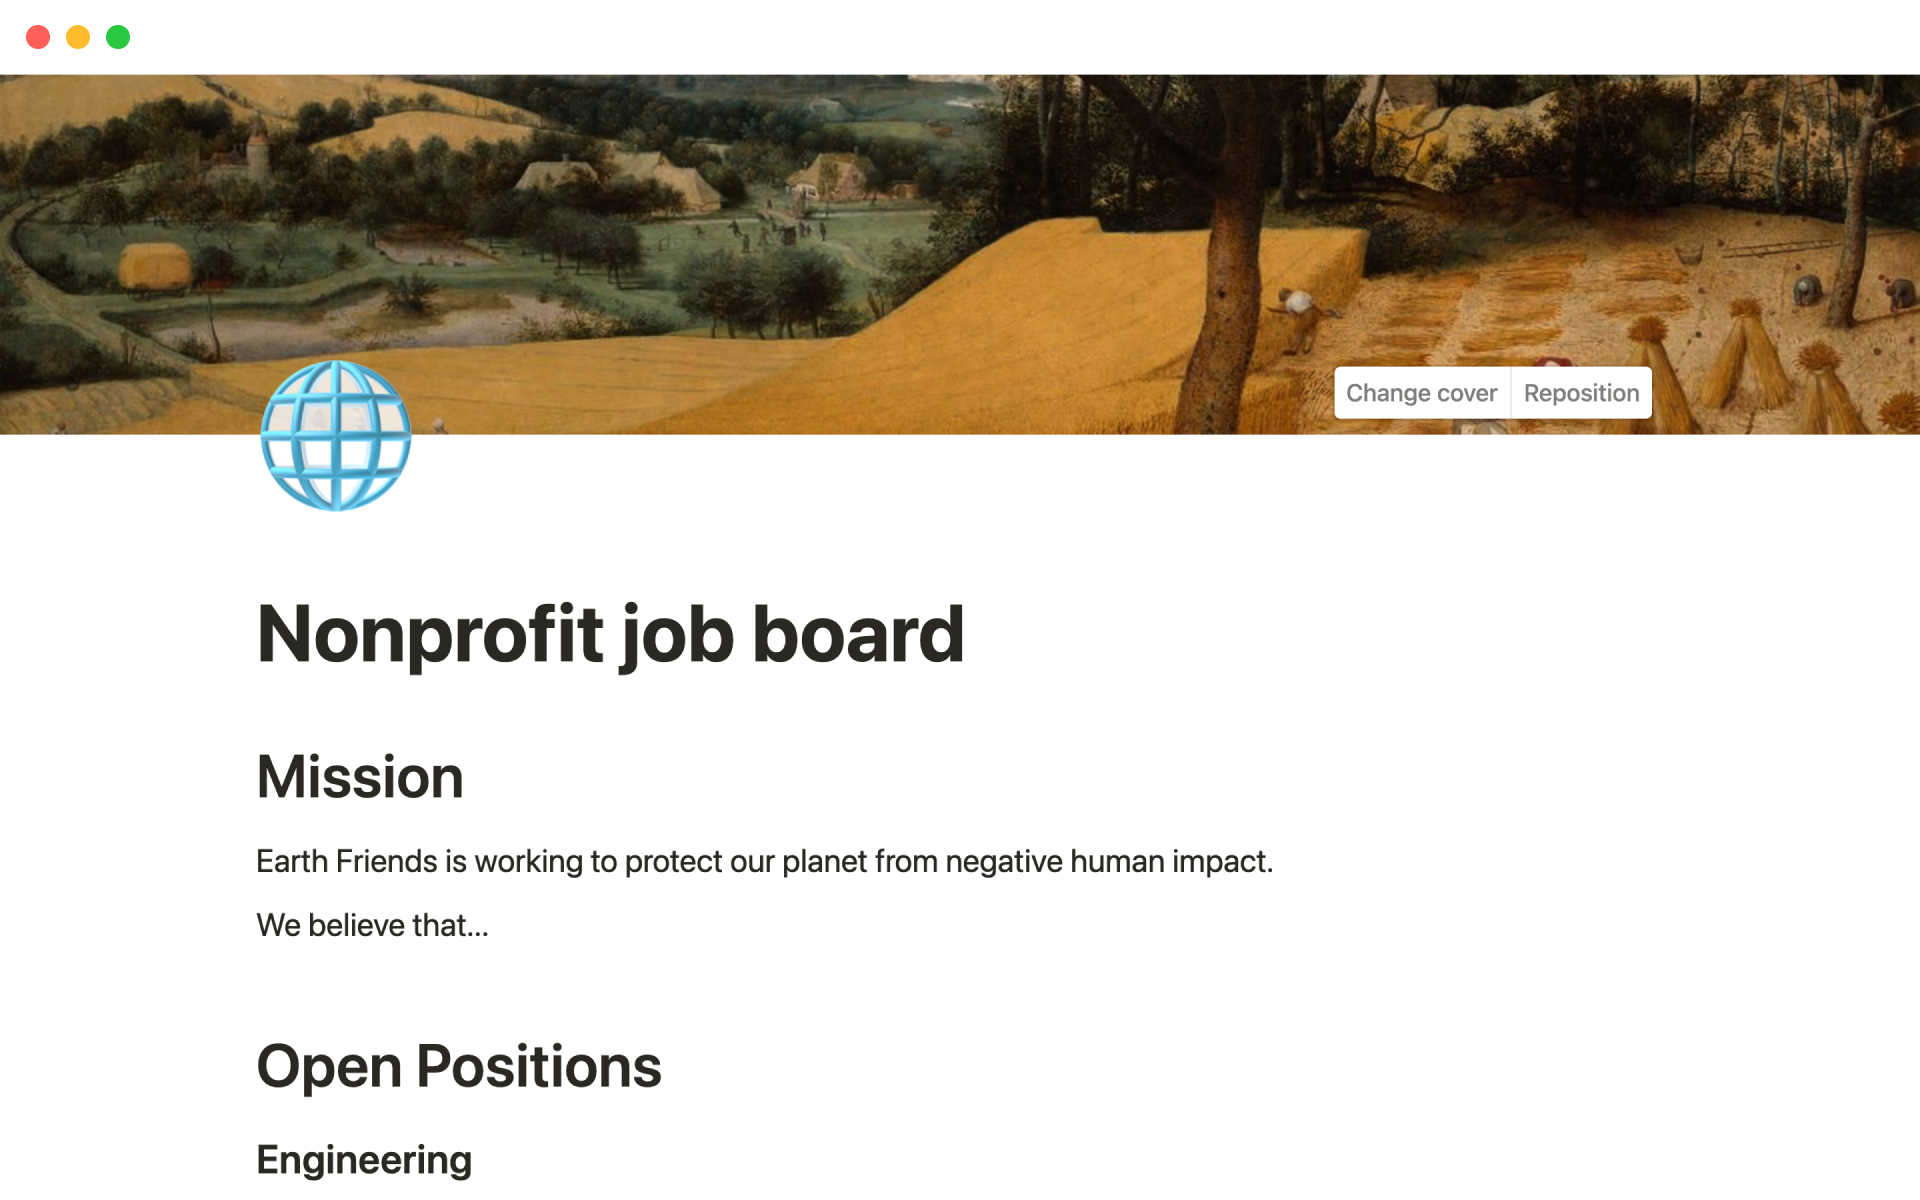 Use this page as a public careers page for your nonprofit.